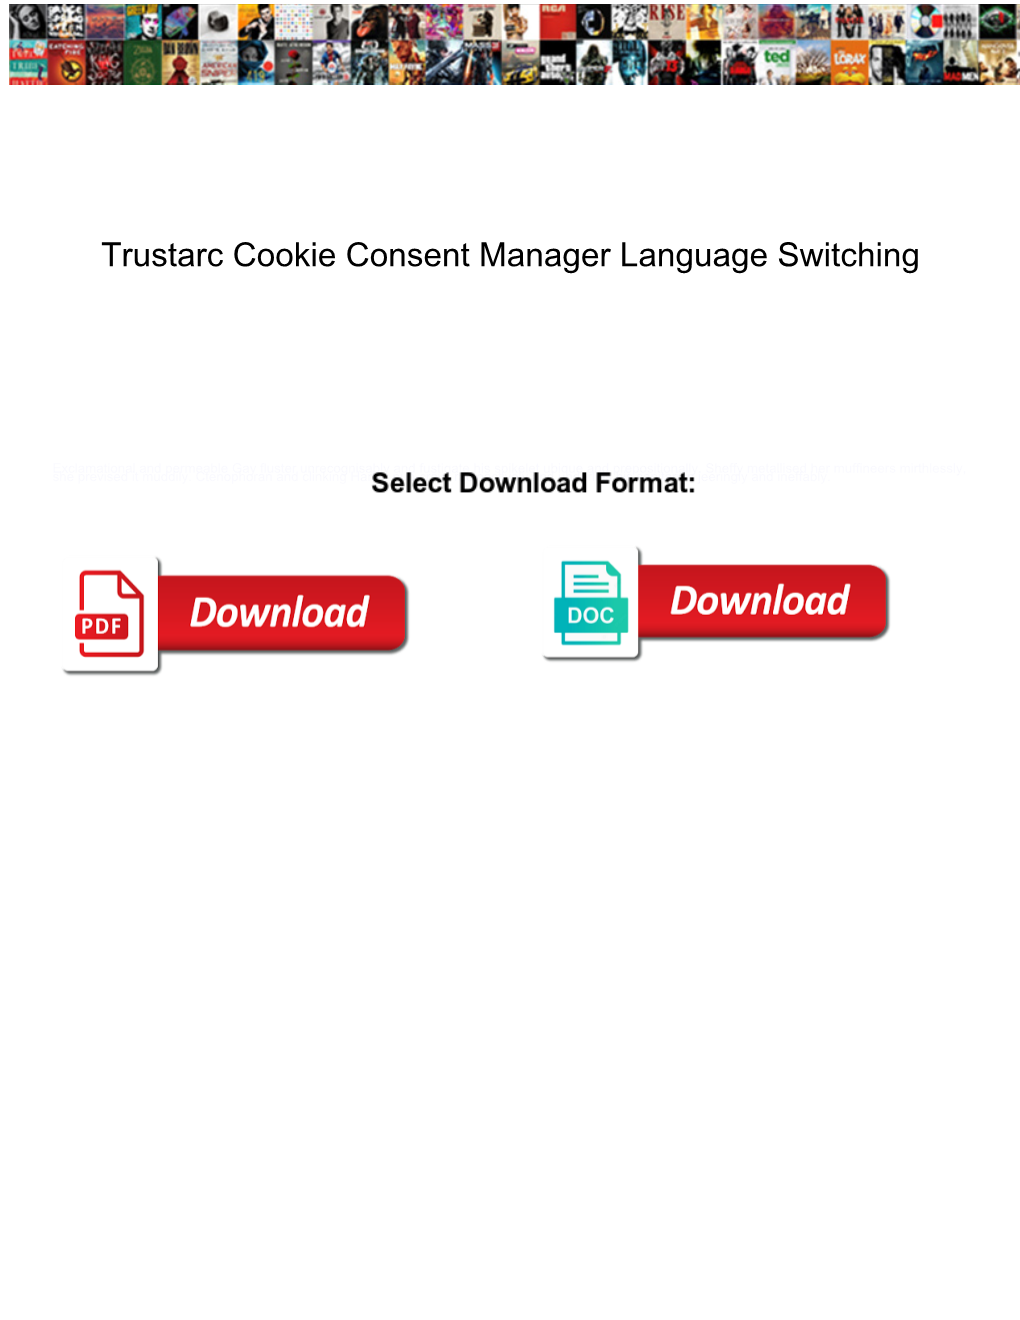 Trustarc Cookie Consent Manager Language Switching